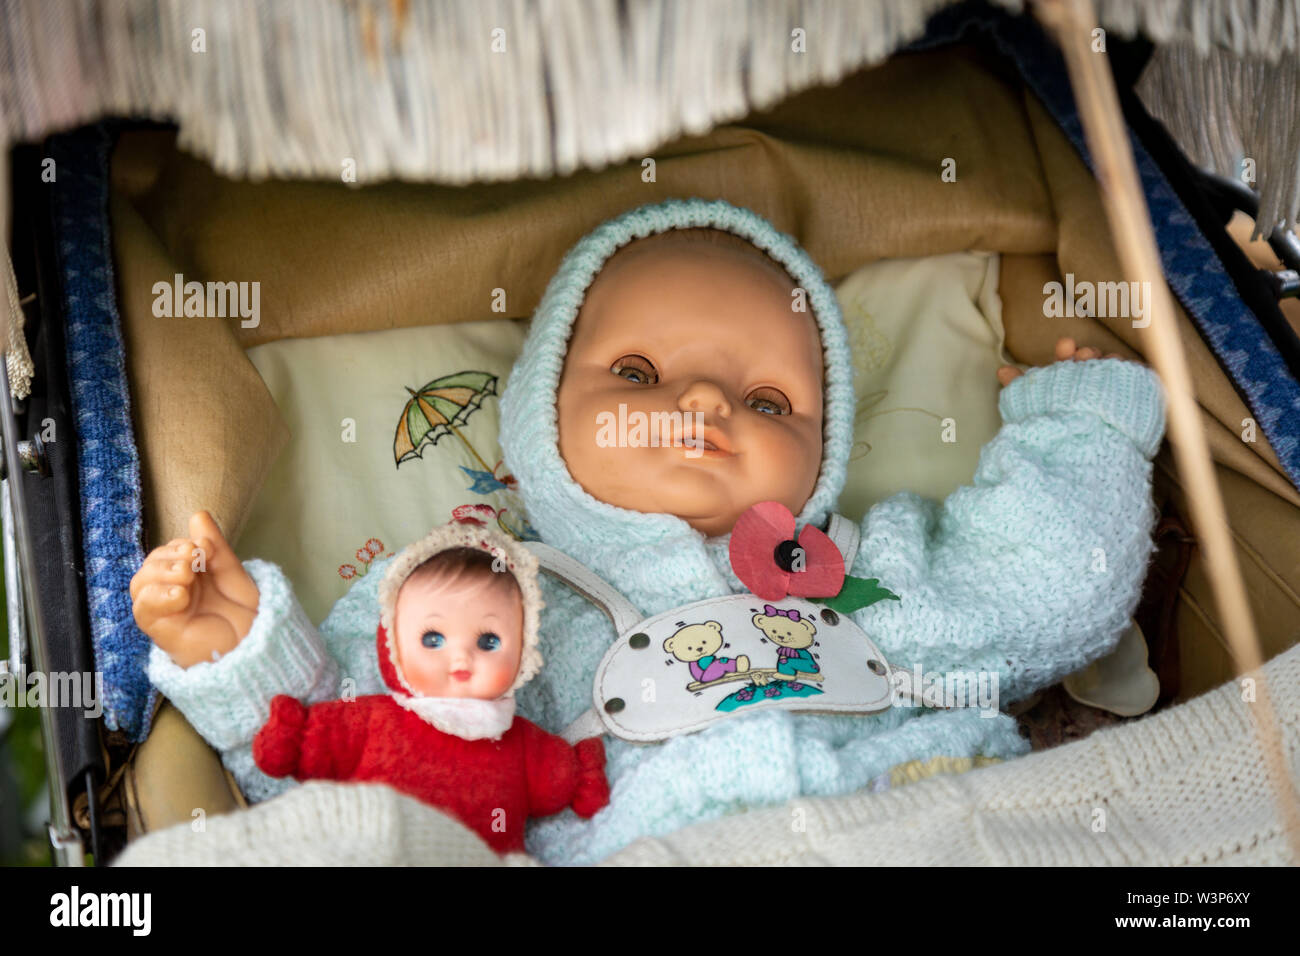 Old fashioned traditional baby doll in a pram Stock Photo